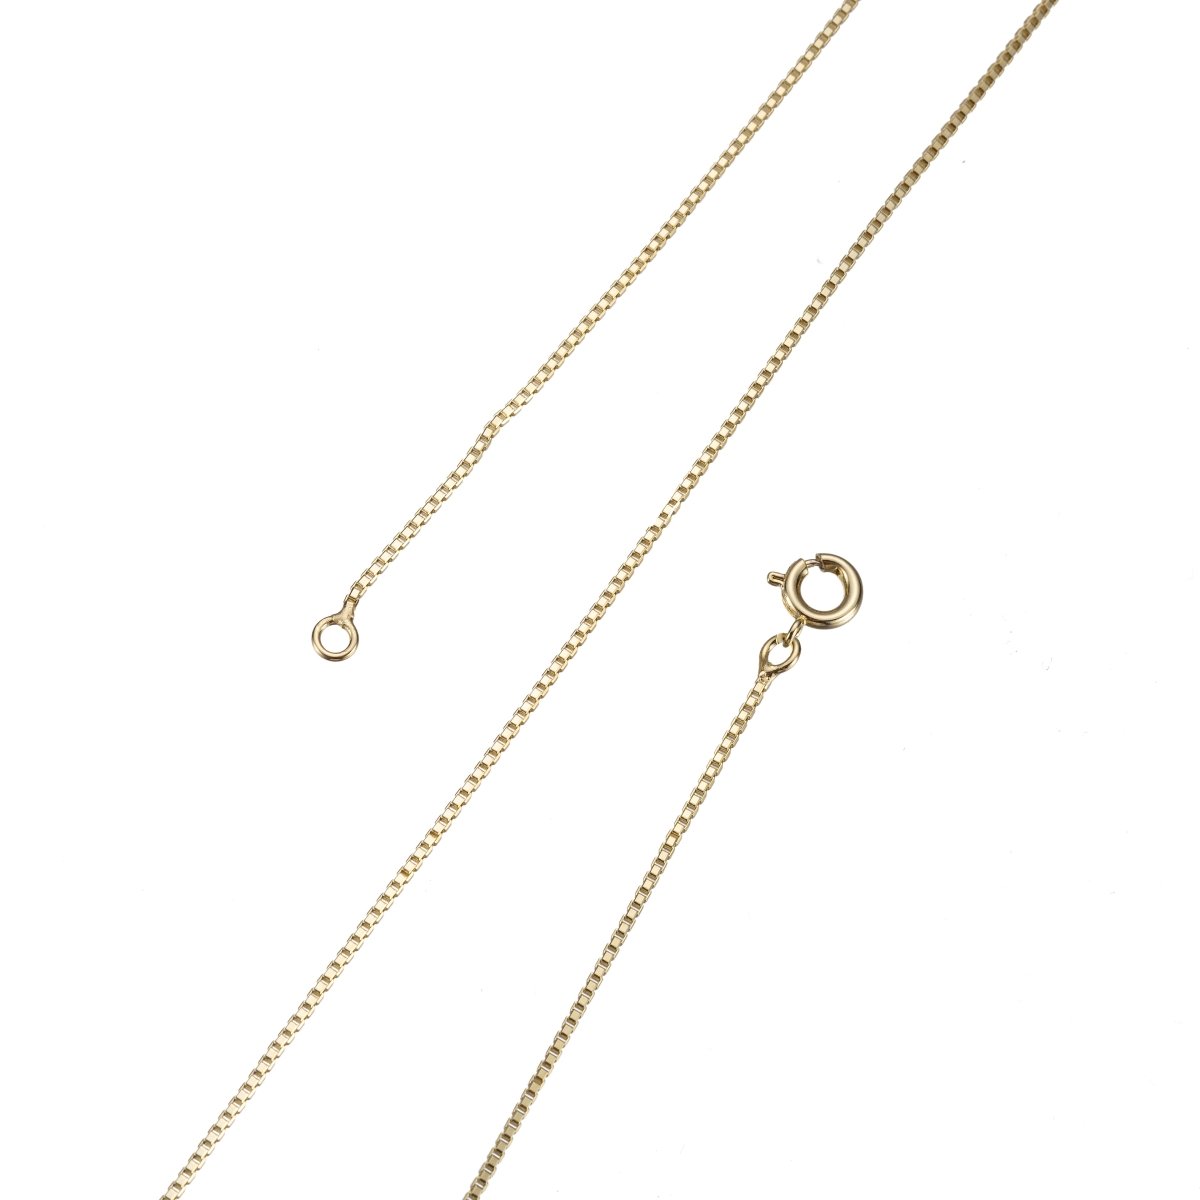 16 inch ready to wear Gold Plated Box Chain Necklace, Layering Dainty Box Chain For Jewelry Making with Pendant Charm WA221 - DLUXCA